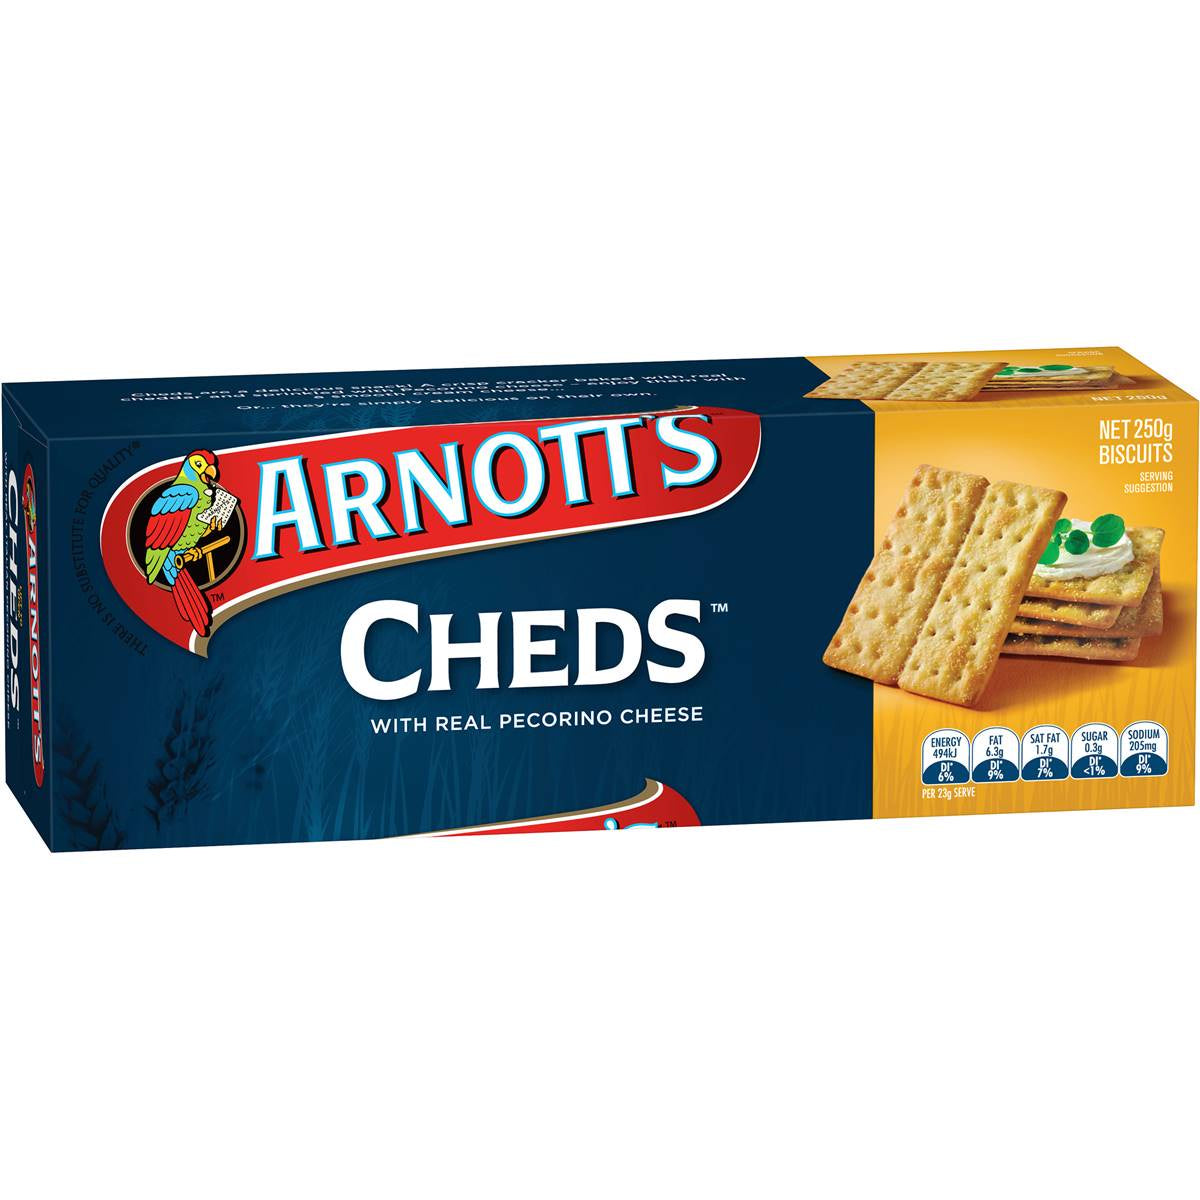 Arnotts Cheds Crackers 250G